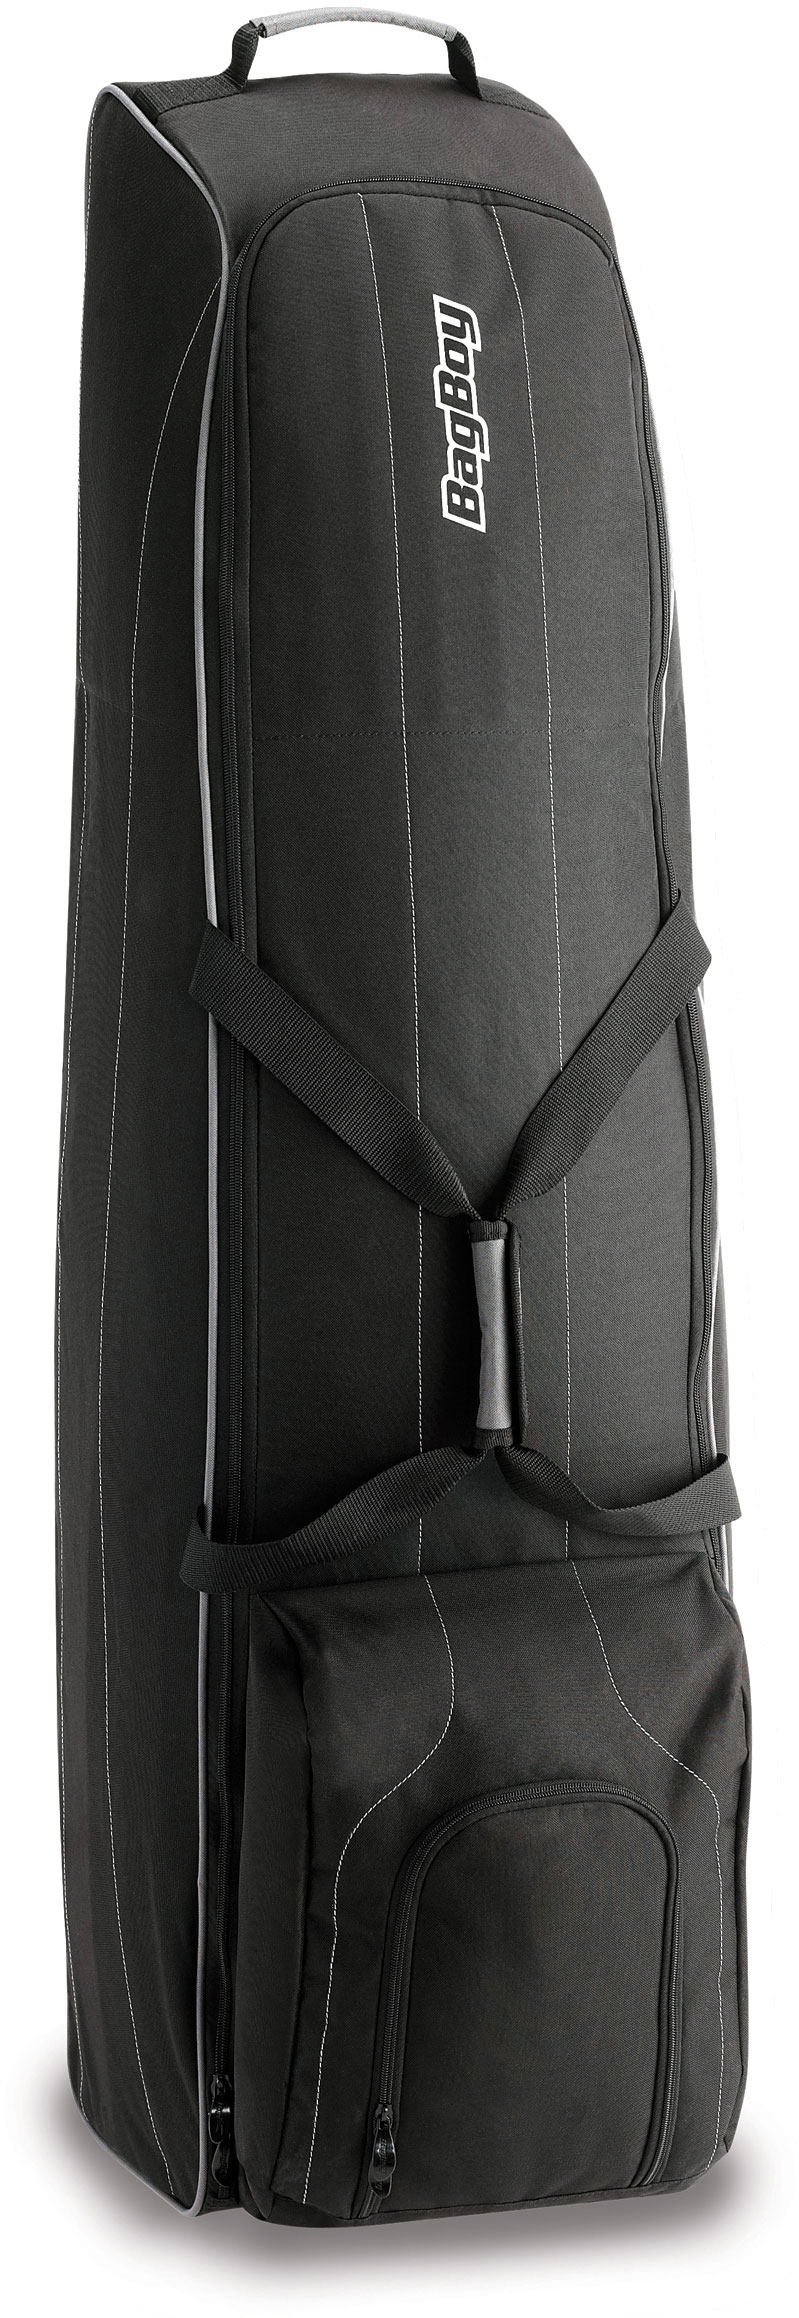 BagBoy T460 Wheeled Travel Cover